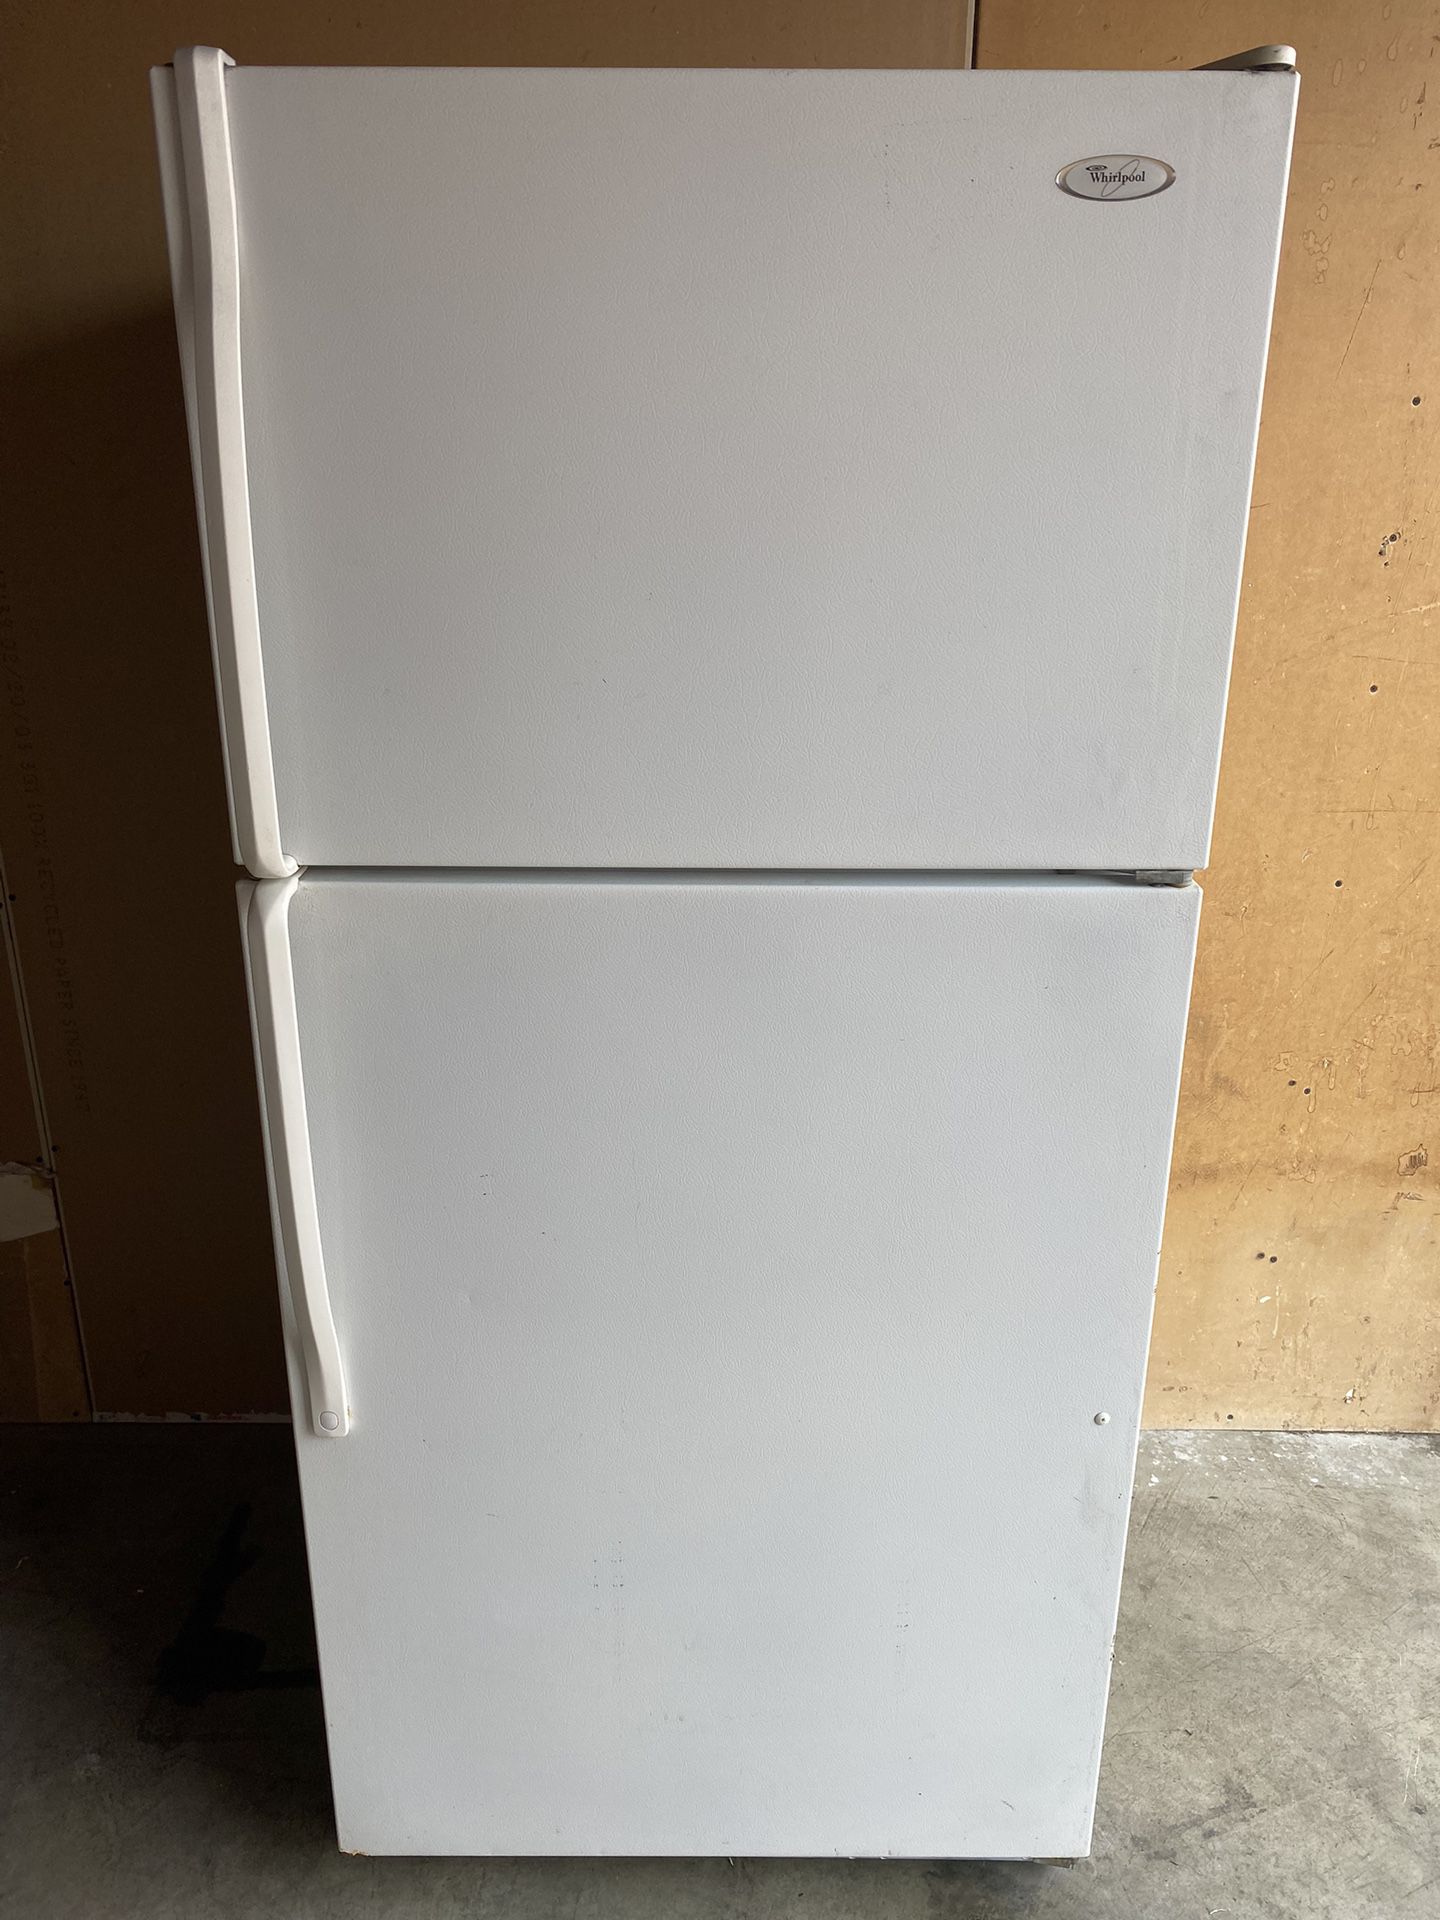 Excellent Whirlpool Refrigerator W Warranty. Free Delivery 